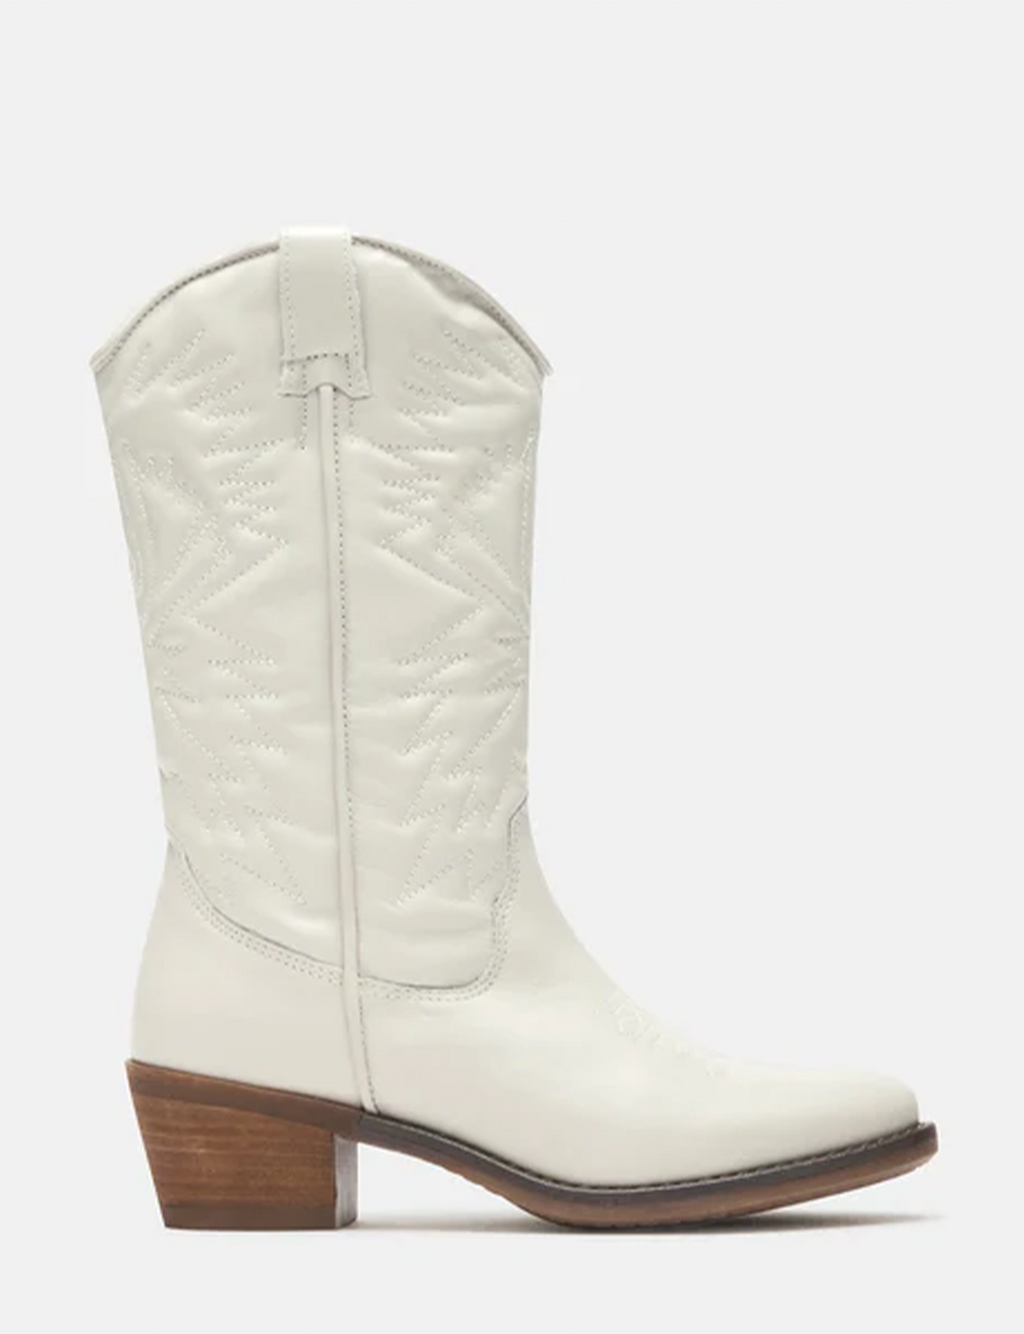 Hayward Boot, White Leather